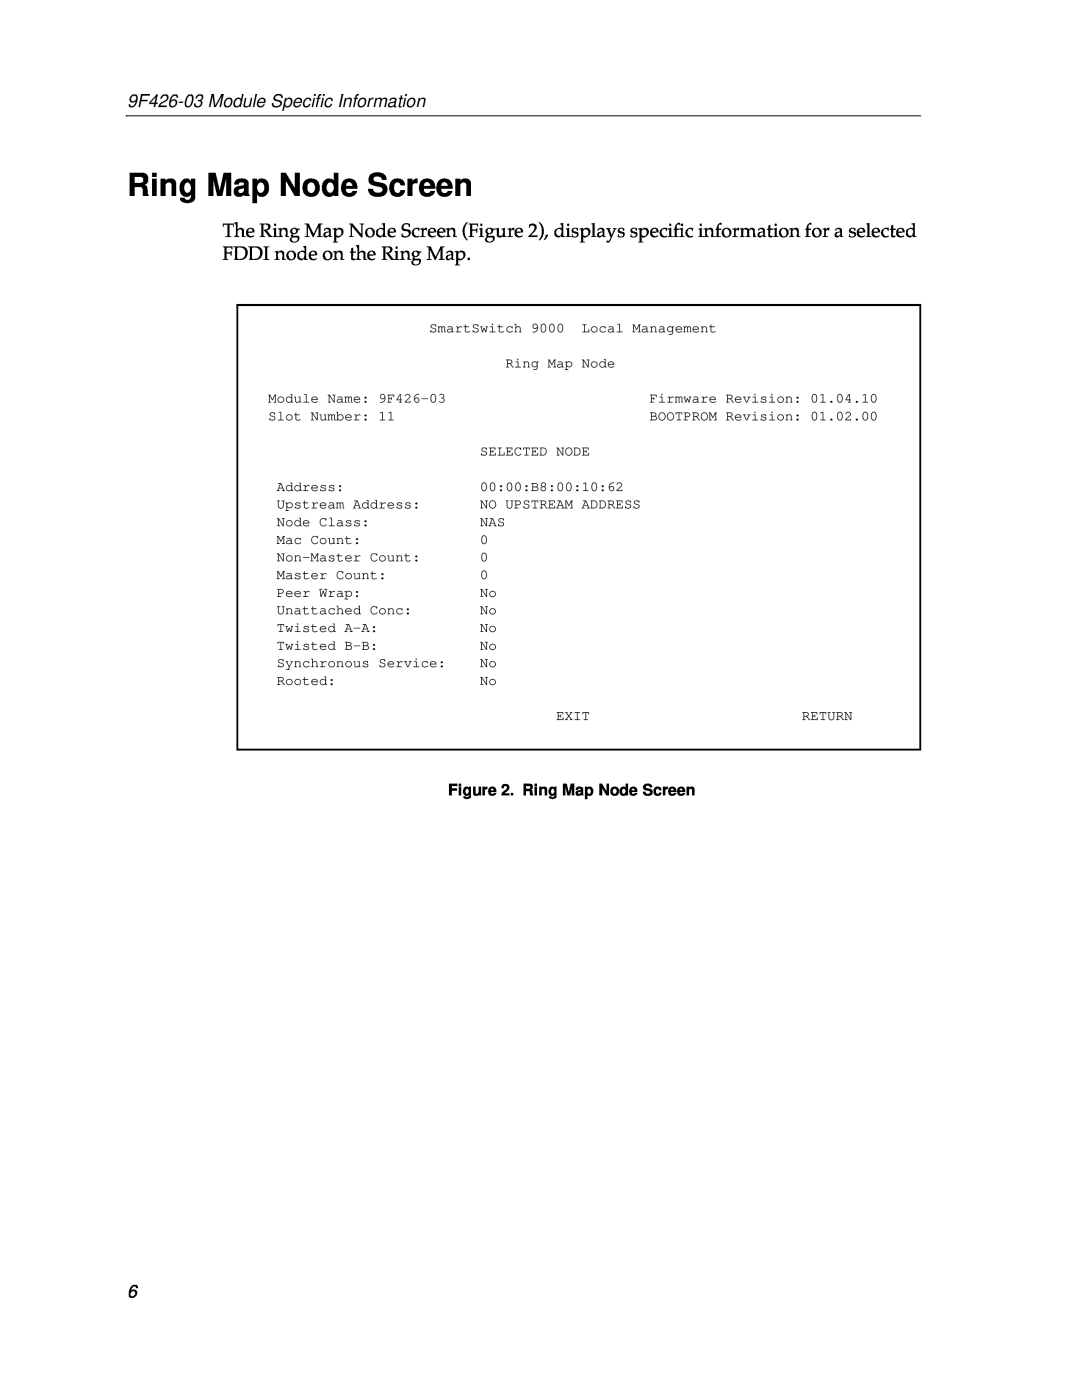 Cabletron Systems appendix Ring Map Node Screen, 9F426-03 Module Speciﬁc Information 